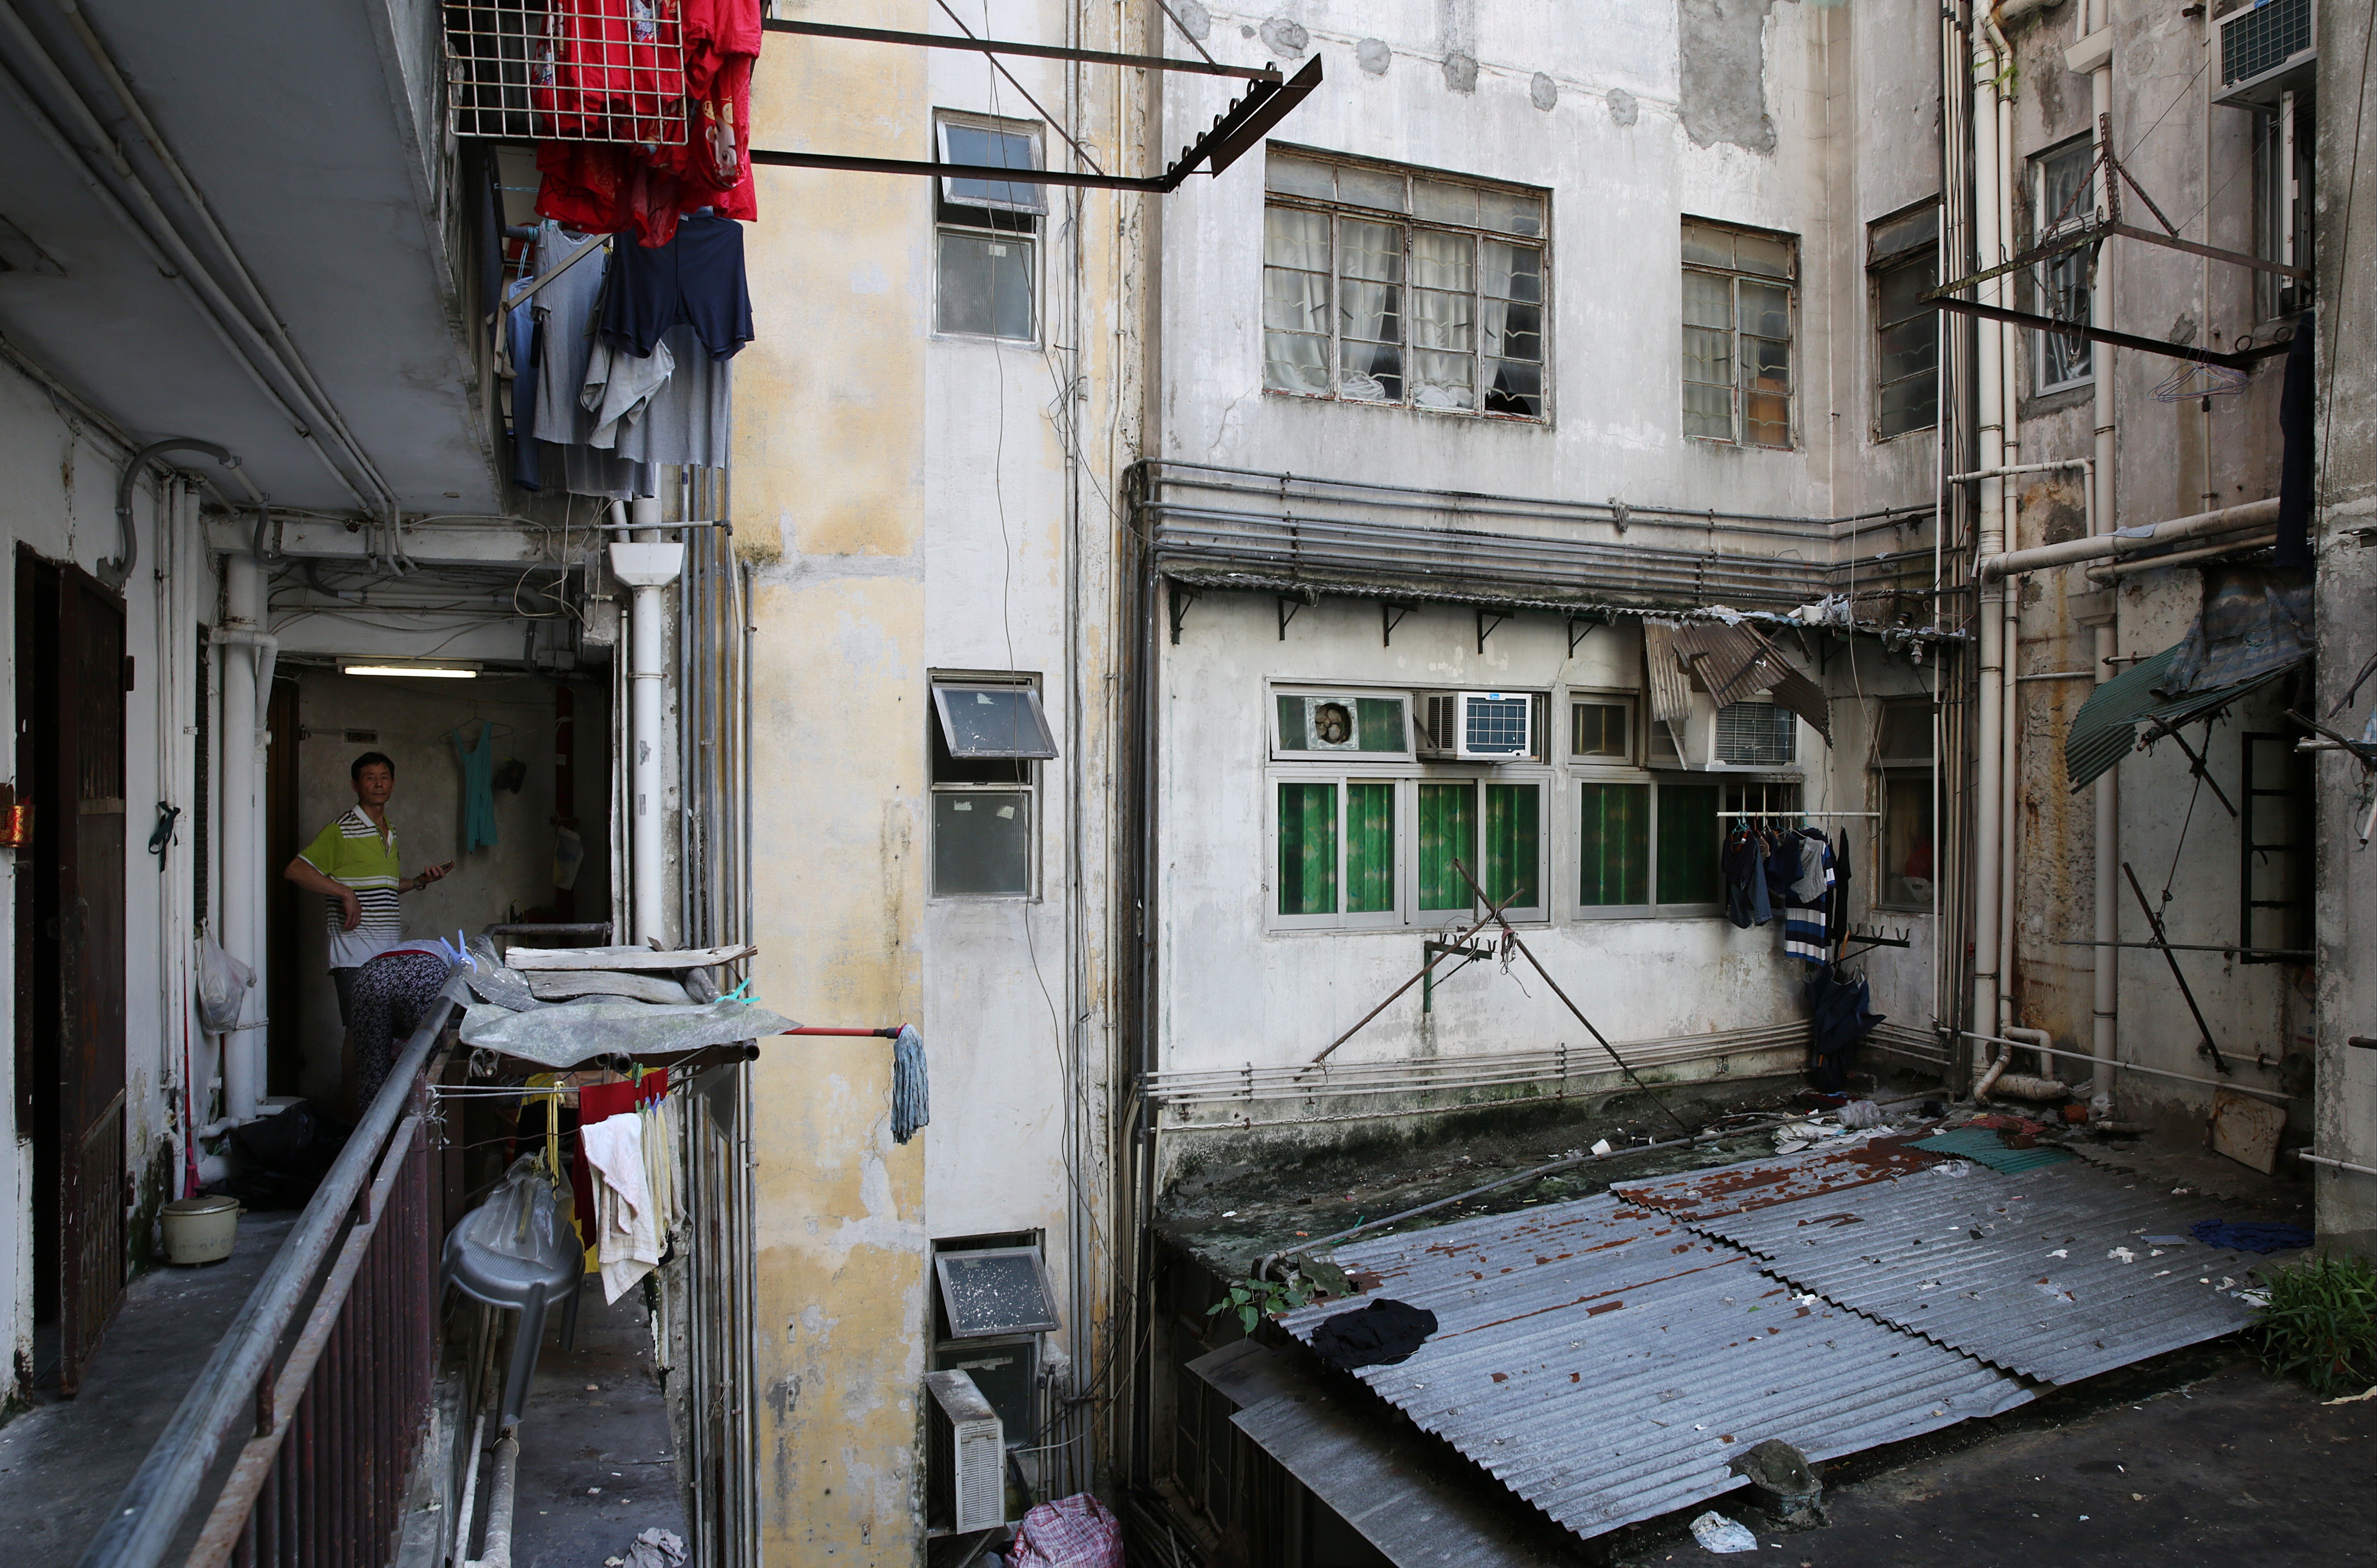 Subdivided flats are mostly found in old tenement buildings that are poorly maintained. Photo: Sam Tsang